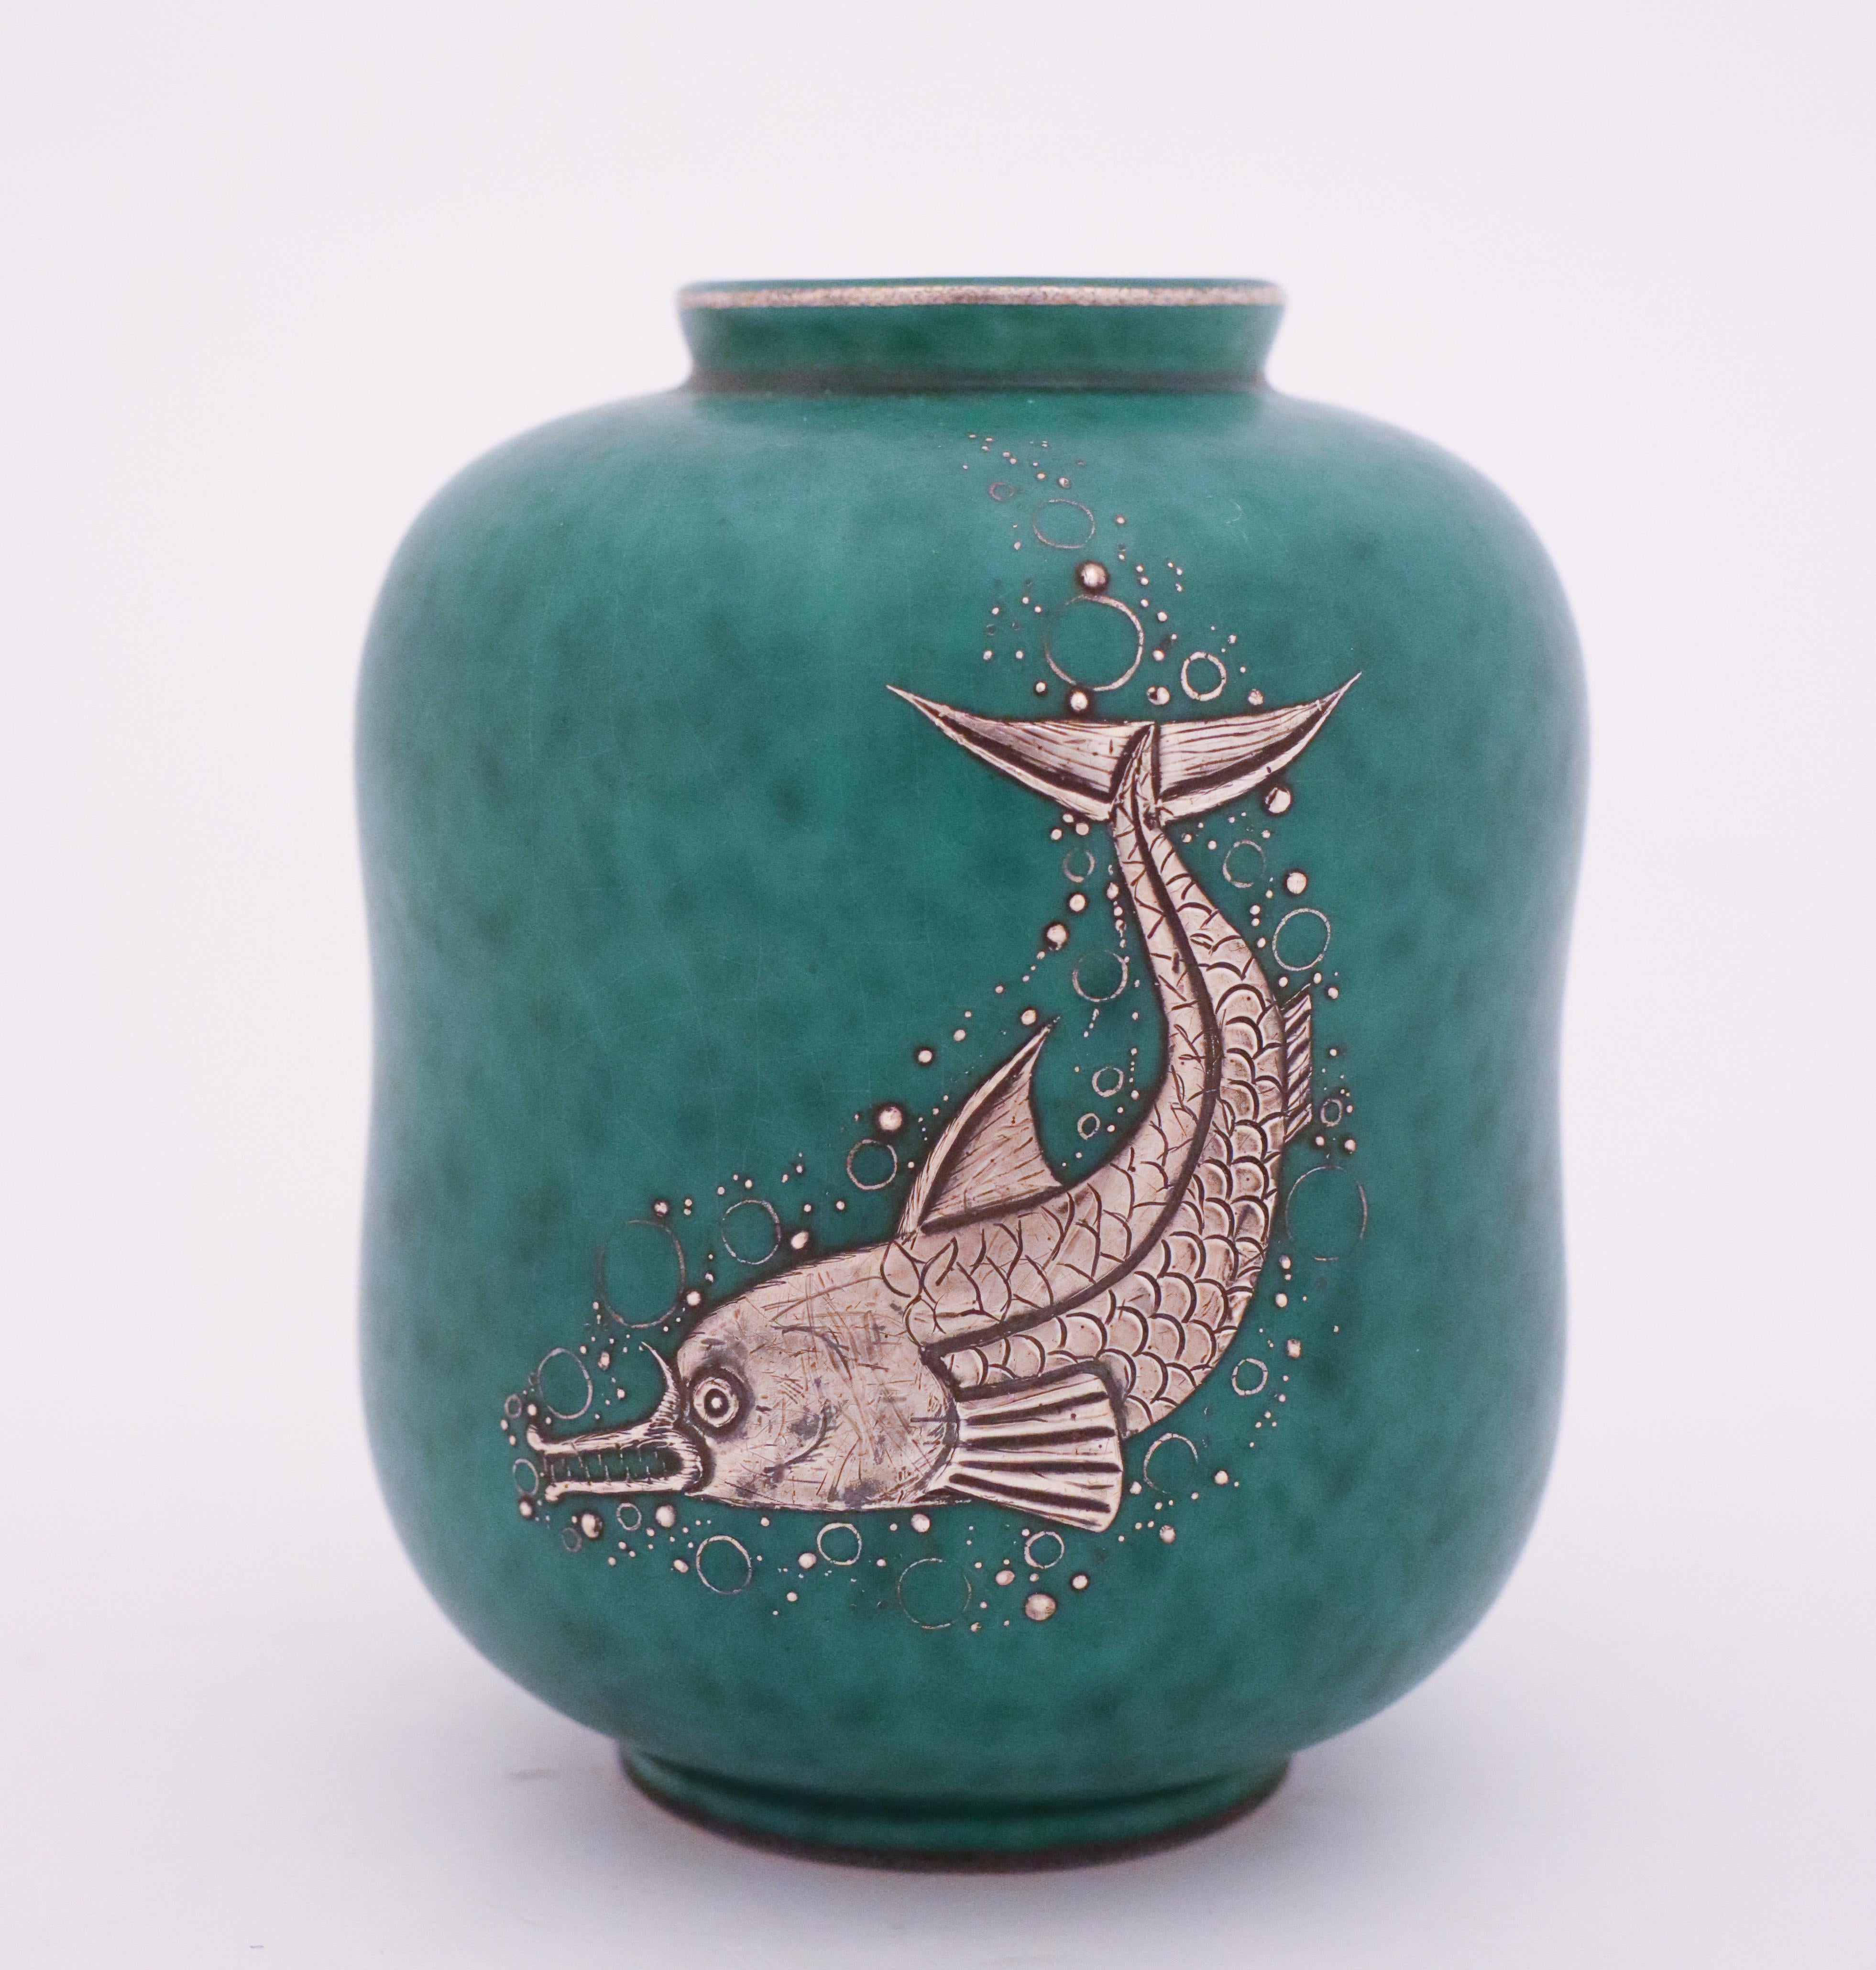 A vase in stoneware of model Argenta designed by Wilhelm Kåge at Gustavsberg with silver decor of a fish, this vase is 12.5 cm high and 9.5 cm in diameter. It´s in mint condition and marked as on photo.